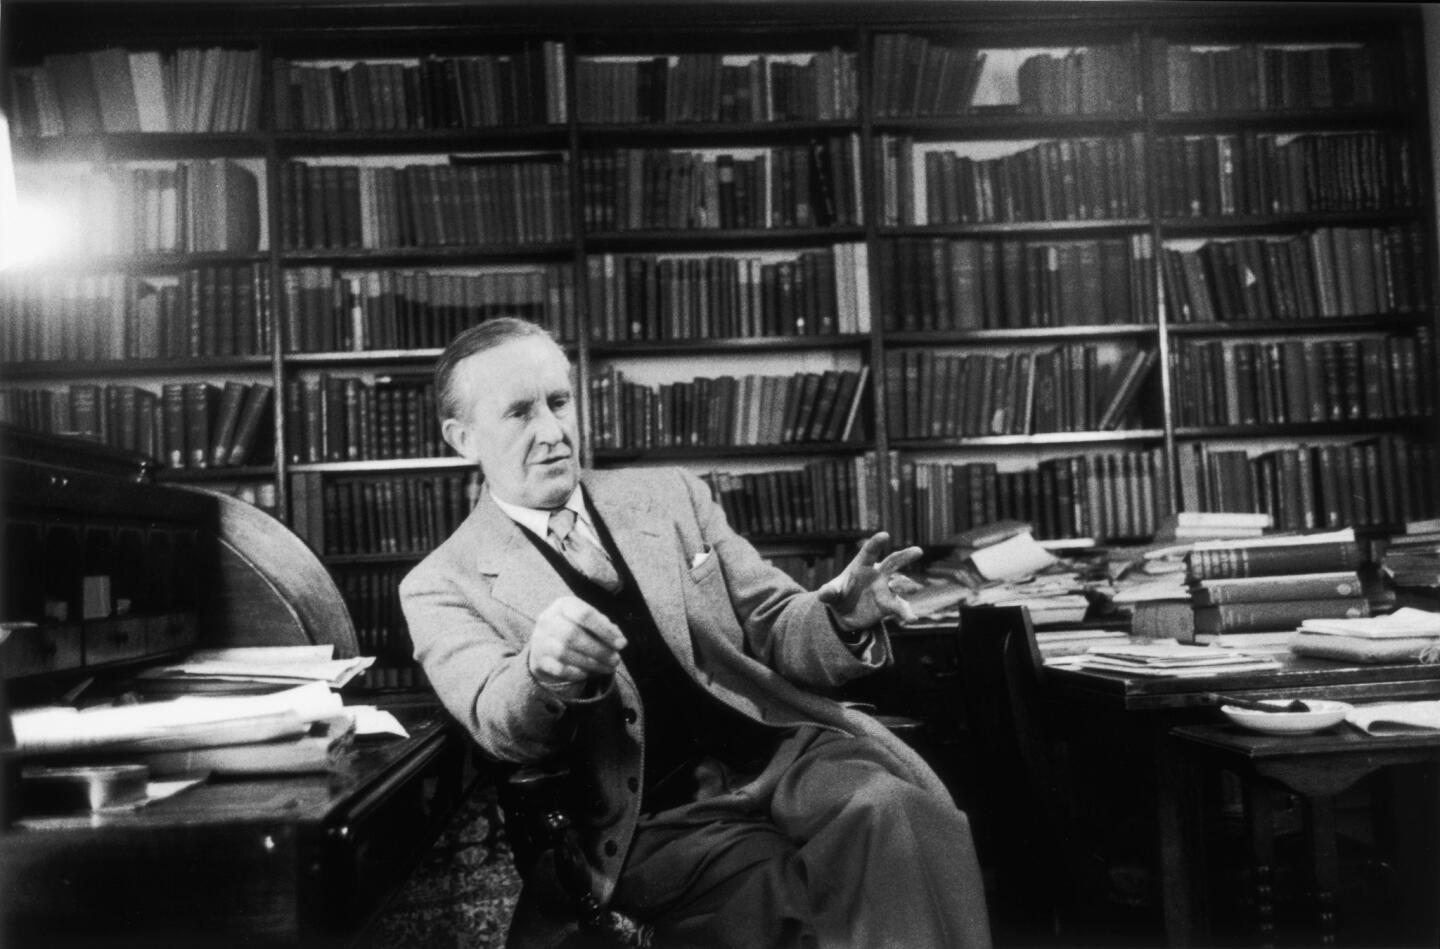 Works by author J.R.R. Tolkien, shown in 1955, continued to see the light of day throughout the 1980s, including: "Finn and Hengest" (1982): Essay on two minor players in "Beowulf," a pair of Anglo-Saxon warriors. "Mr. Bliss" (1982): Facsimile edition of a sweet picture book Tolkien wrote for his children. The eponymous Mr. Bliss drives a bright yellow motorcar. There are talking bears. "The Monsters and the Critics & Other Essays" (1983): Collected academic works, including the famous title essay on "Beowulf."